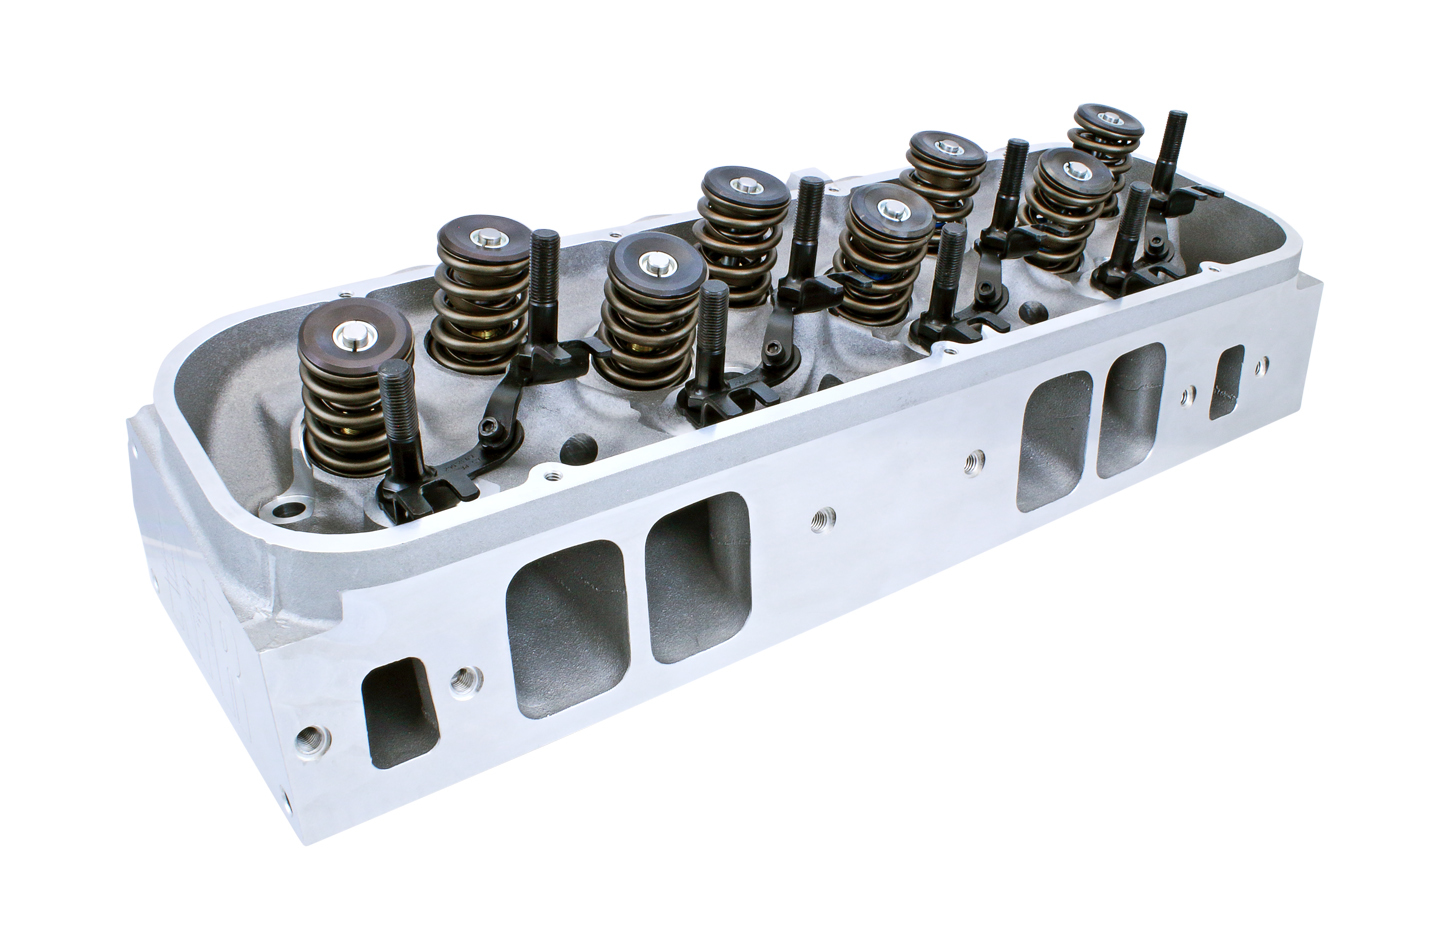 Air Flow Research 3001 Cylinder Head, Enforcer, Assembled, 2.250 / 1.880 in Valves, 325 cc Intake, 122 cc Chamber, 1.550 in Springs, Aluminum, Big Block Chevy, Each